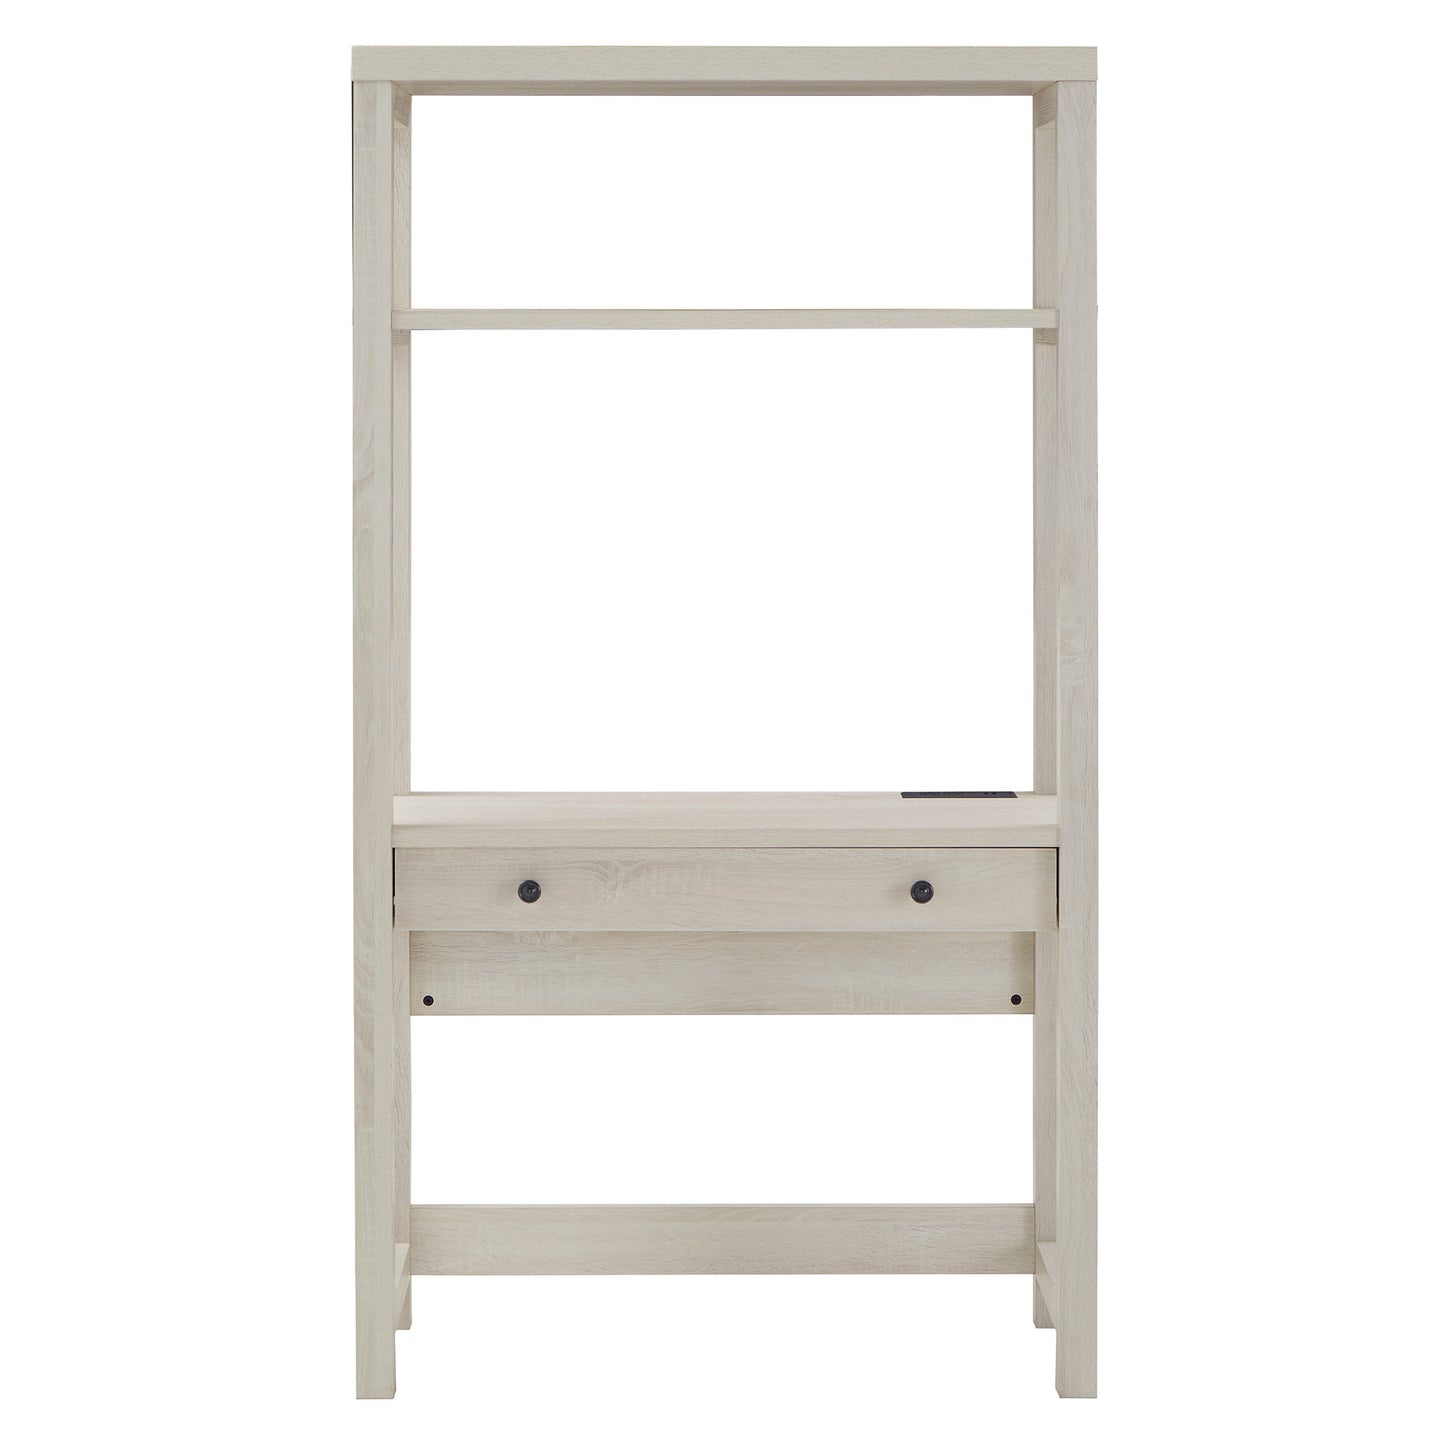 38 in. Wall Bookshelf with Desk and USB Charger - Antique White Finish